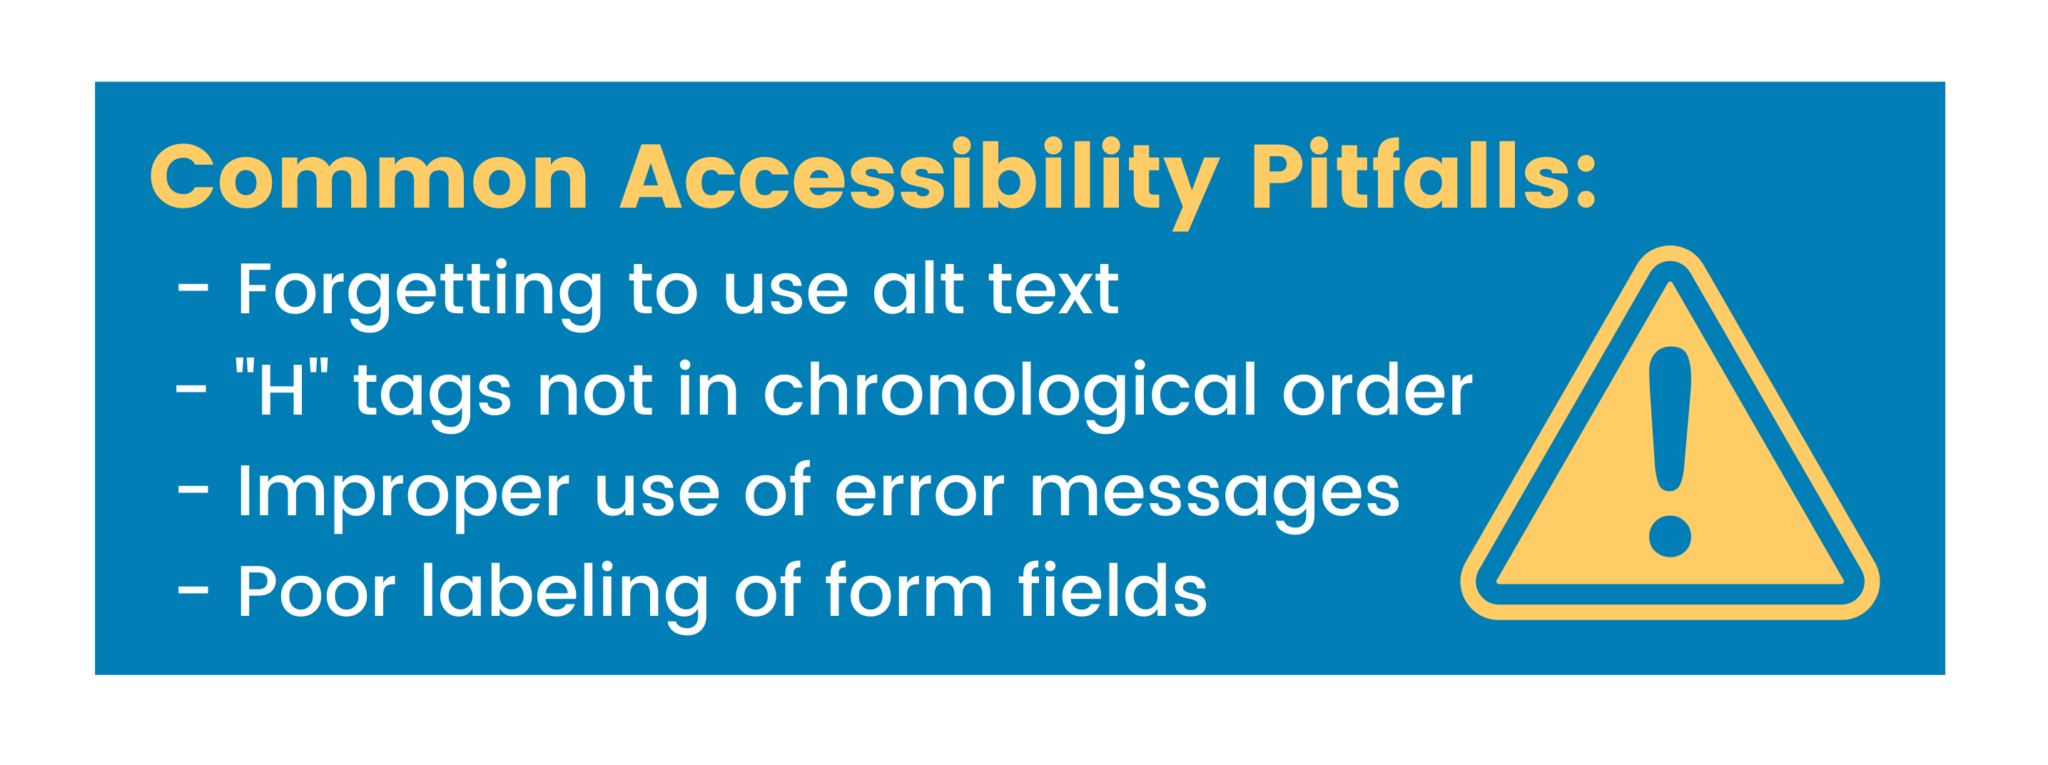 Common accessibility pitfalls include forgetting to use alt text, H tags not in chronological order, improper use of error messages, and poor labeling of form fields